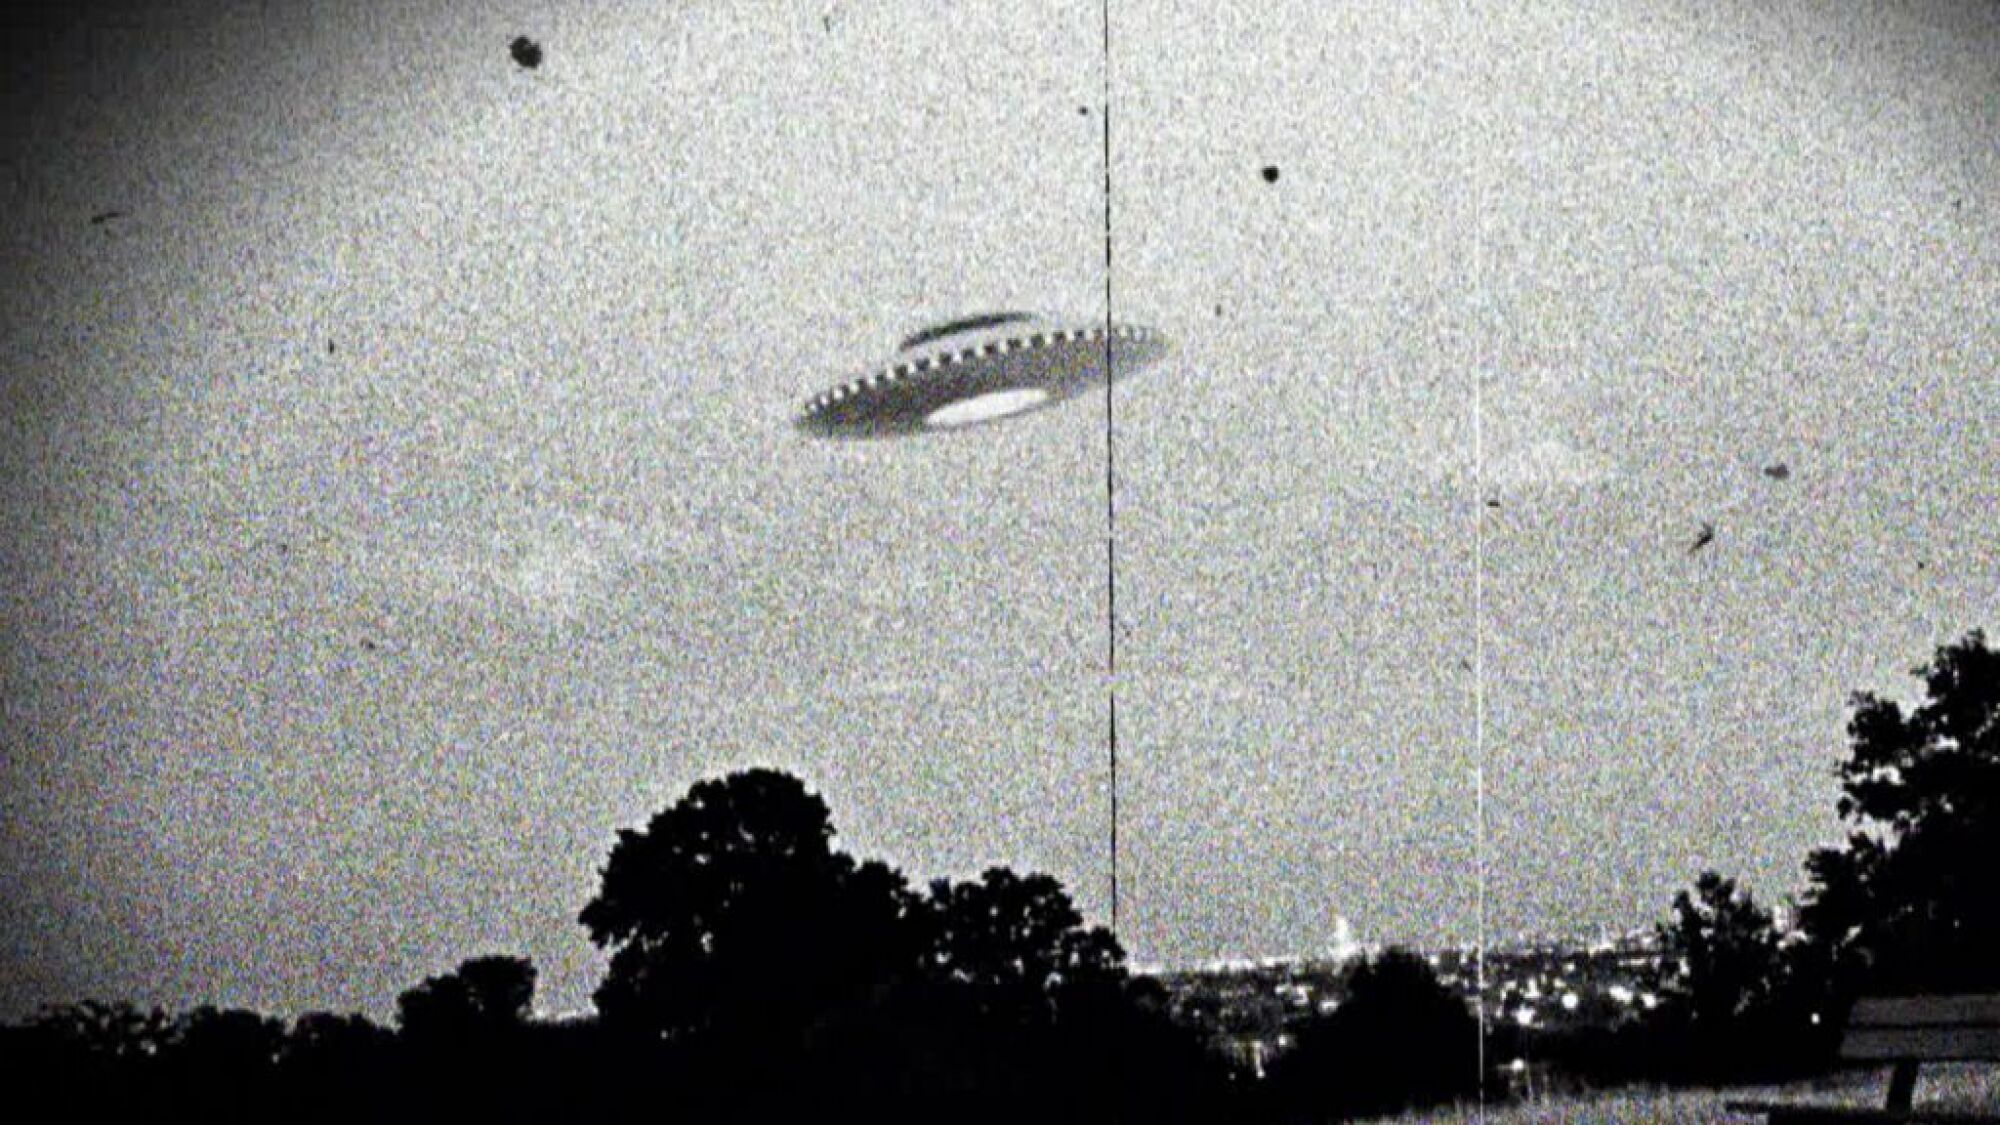 Photographing the alleged Westall UFO encounter